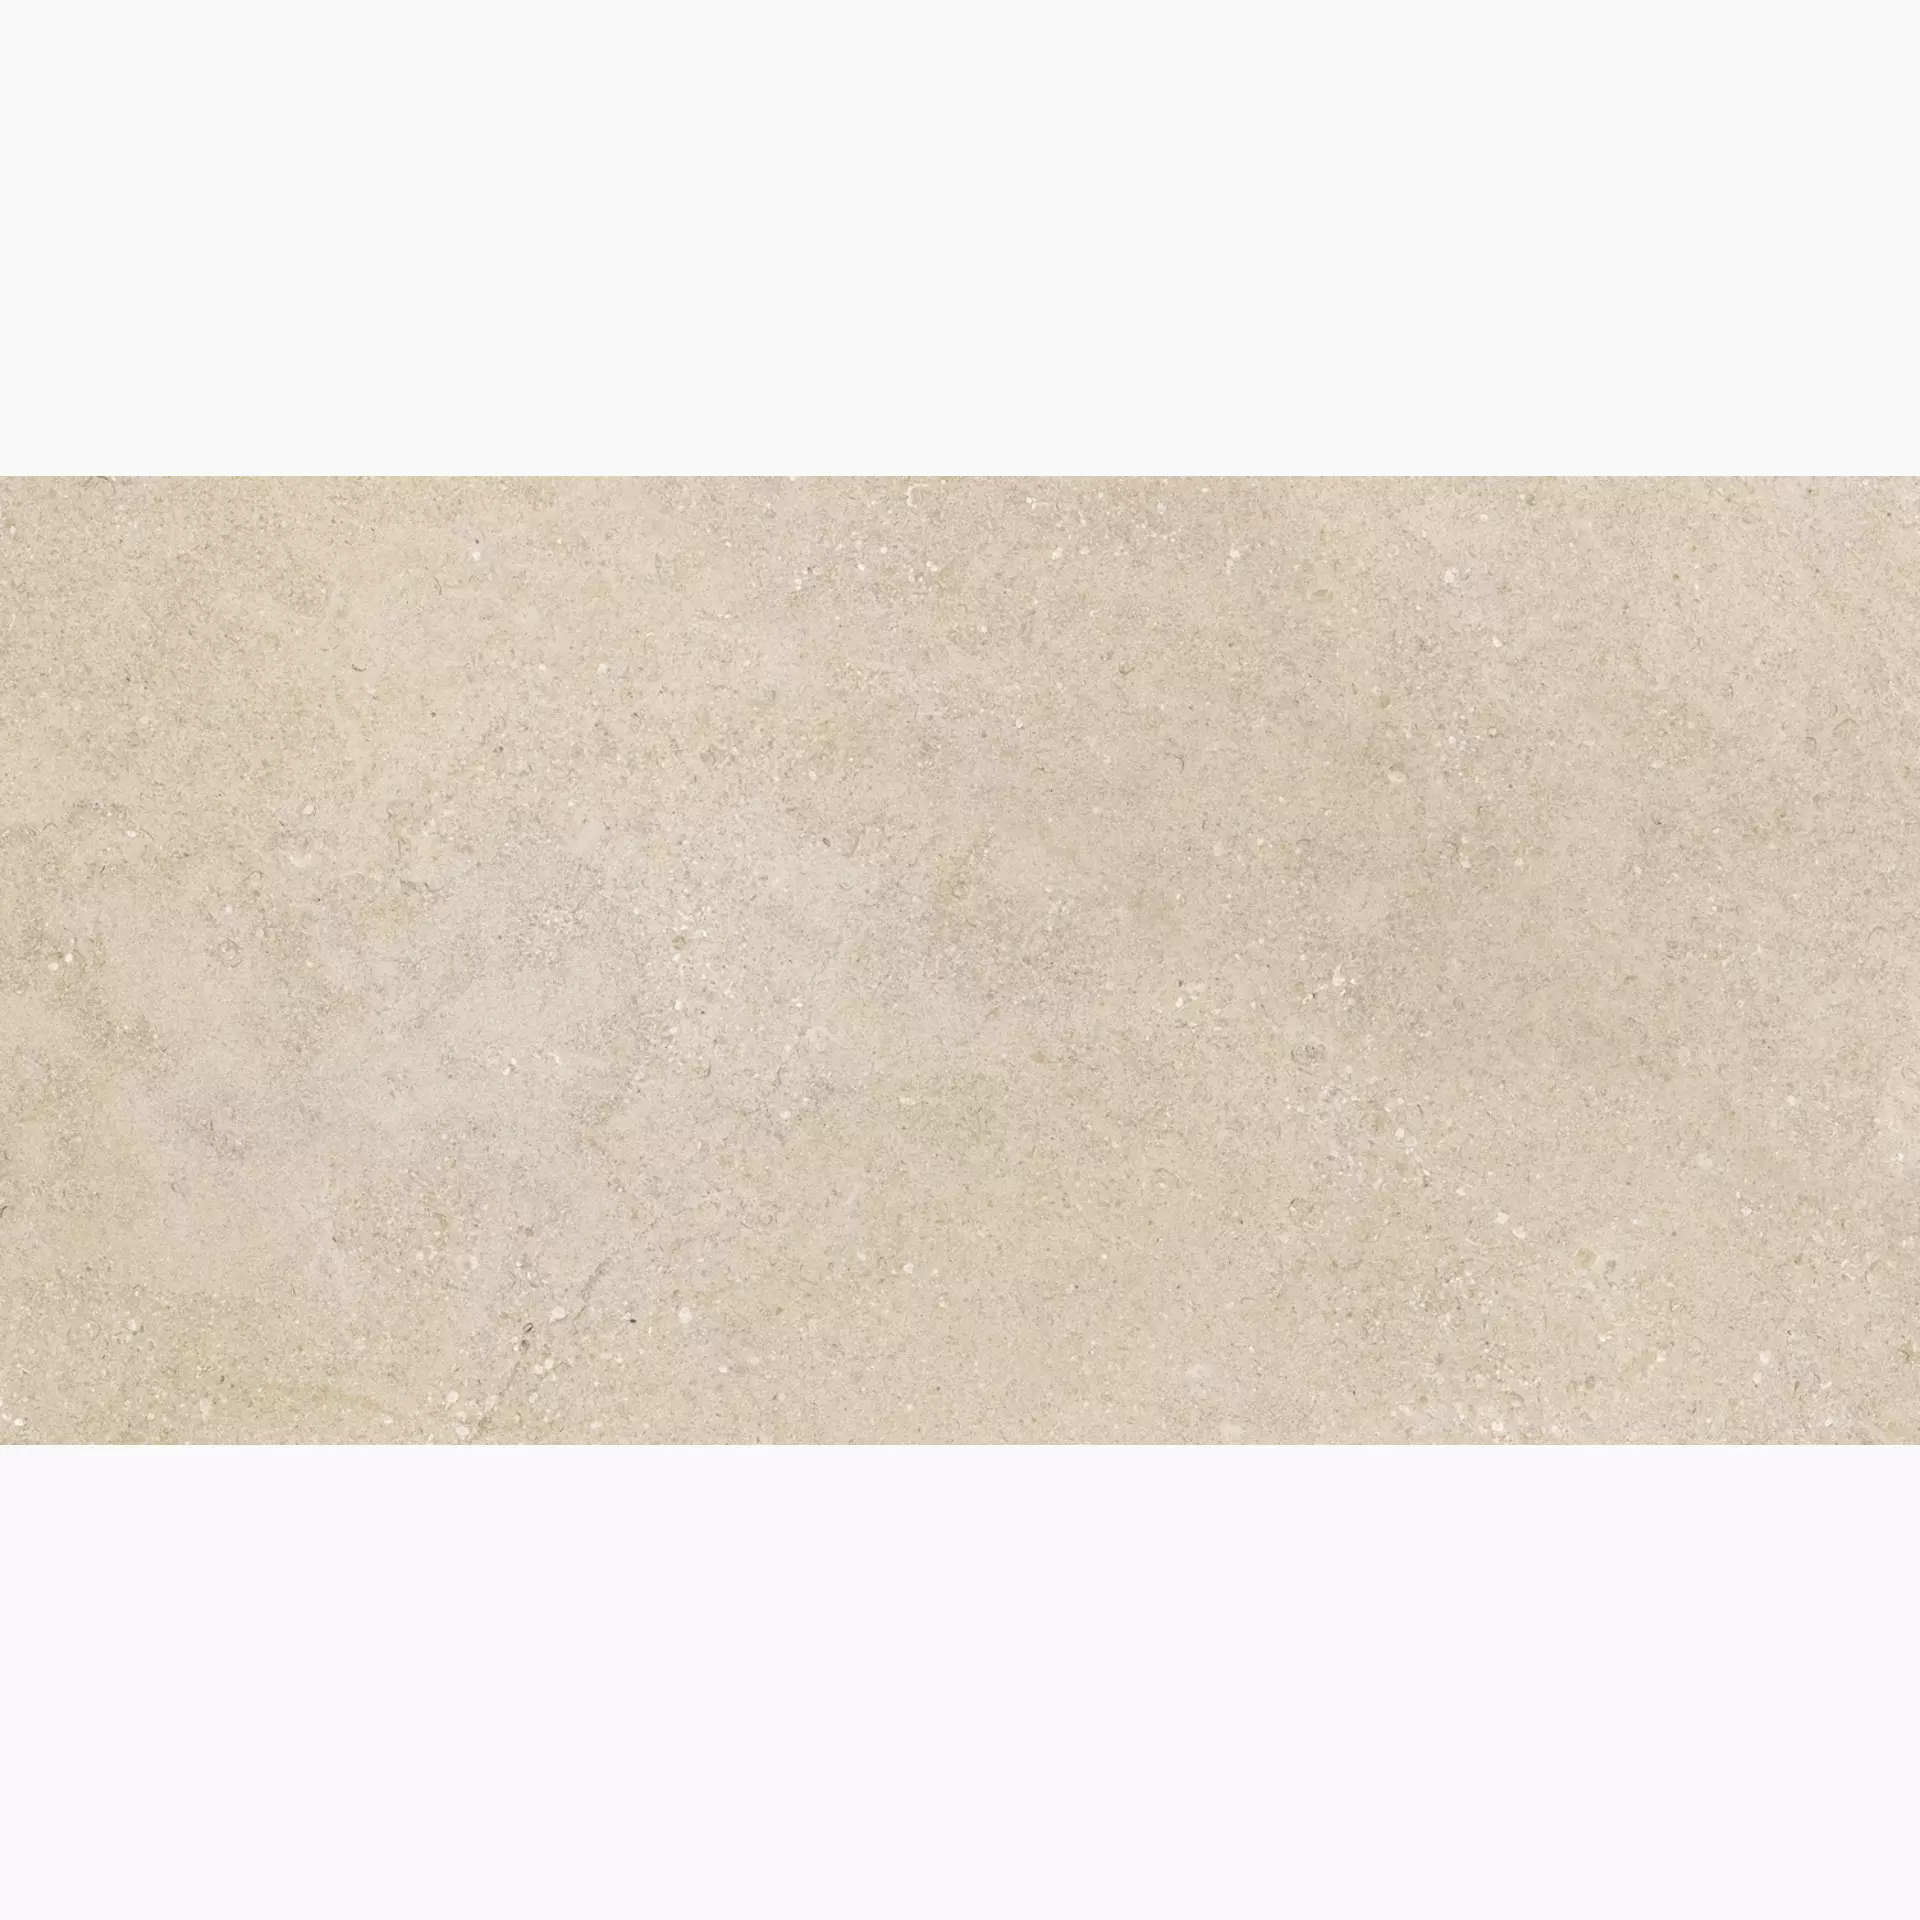 Ragno Kalkstone Sand RAHL rectified 9,5mm